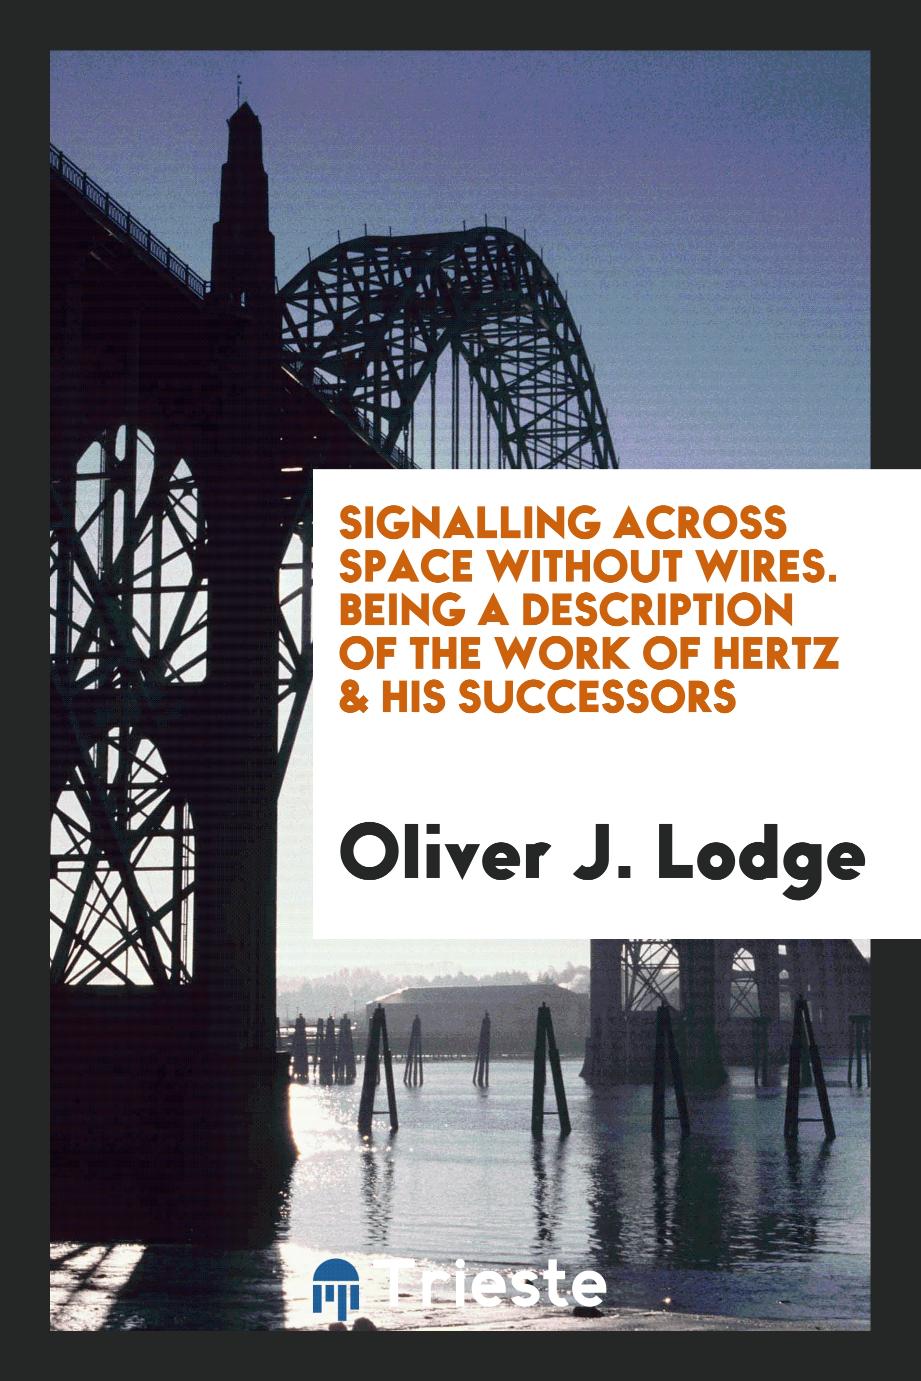 Signalling Across Space Without Wires. Being a Description of the Work of Hertz & His Successors